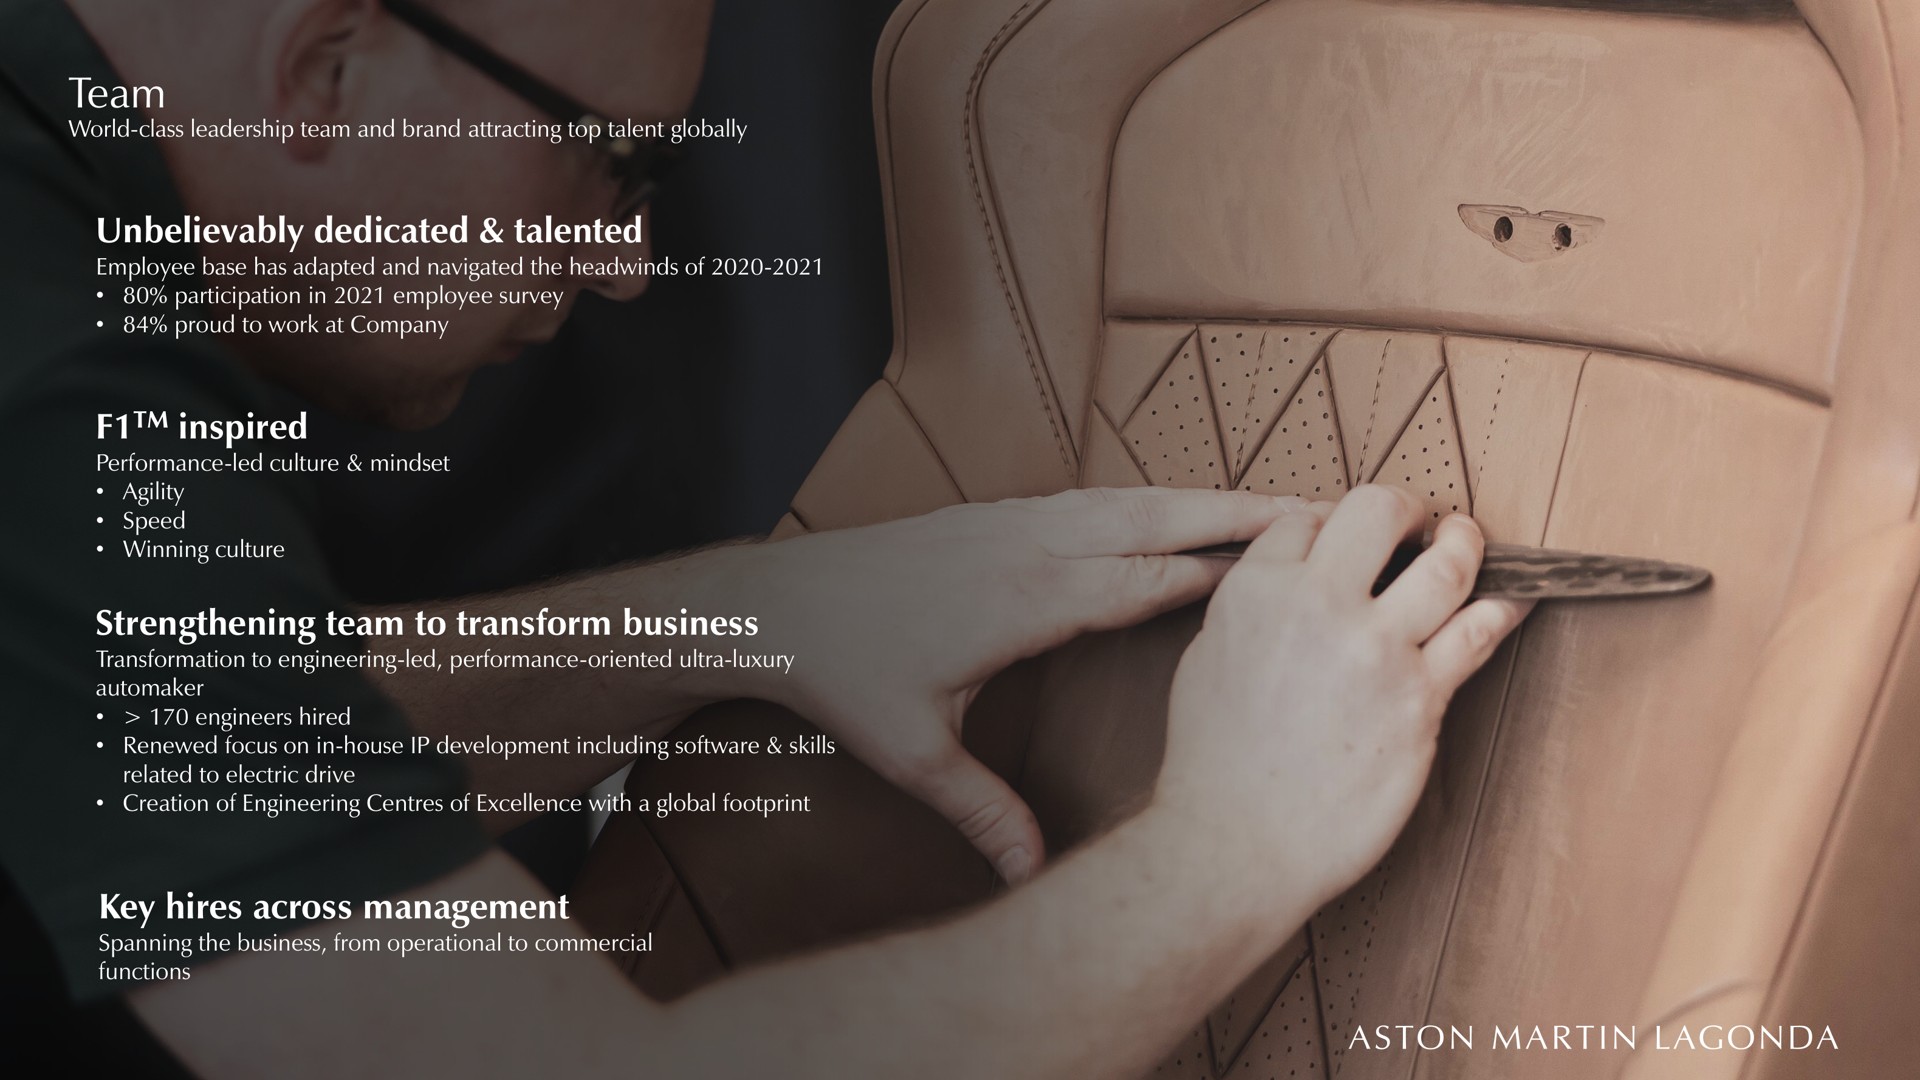 team unbelievably dedicated talented inspired strengthening team to transform business key hires across management | Aston Martin Lagonda